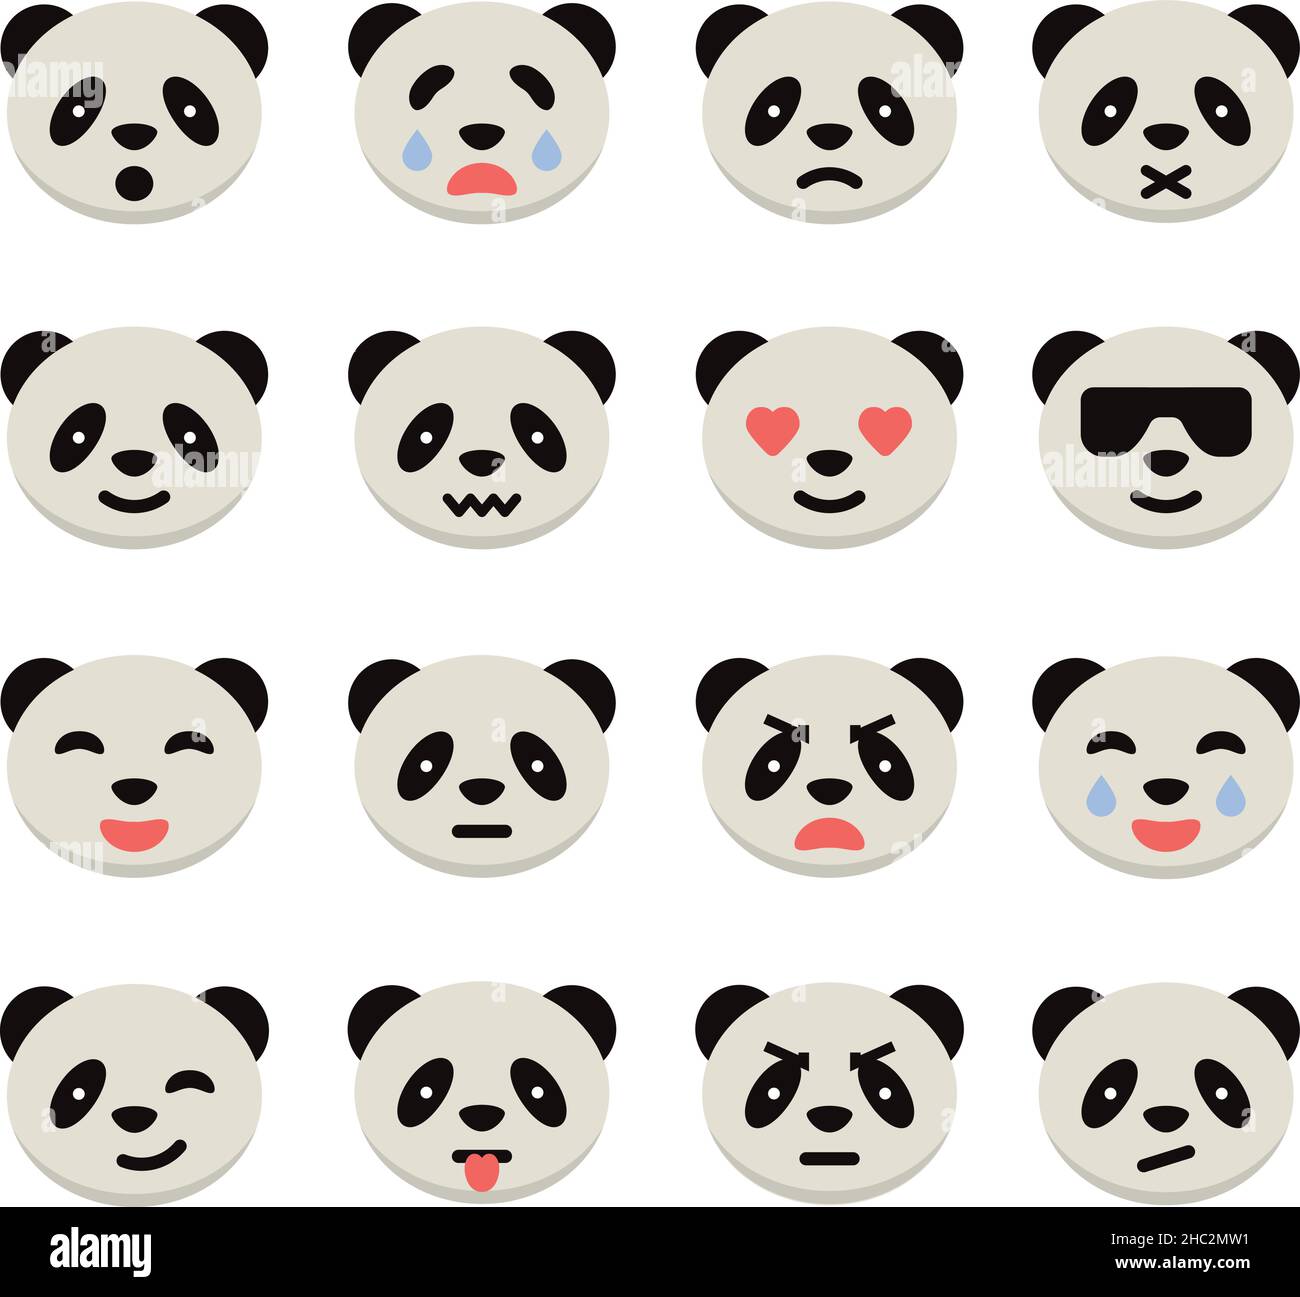 Panda Emotion Icons Set. Cute  pandas with various emotions. Simple vector illustration. Stock Vector